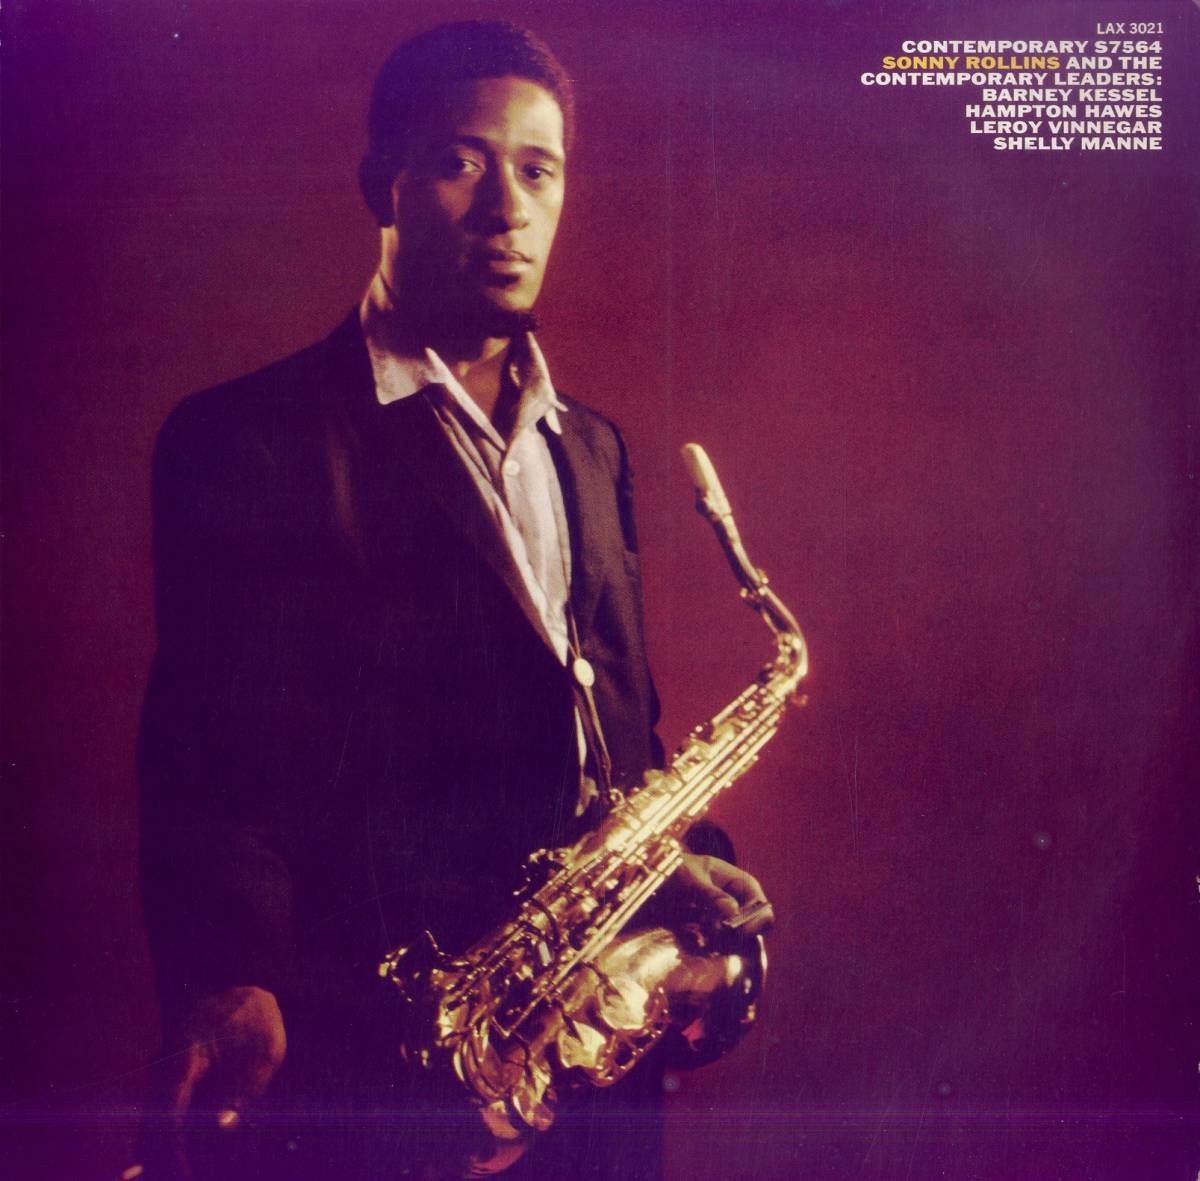 A00571841/LP/ソニー・ロリンズ「Sonny Rollins And The Contemporary Leaders (1975年・LAX-3021・バップ)」_画像1